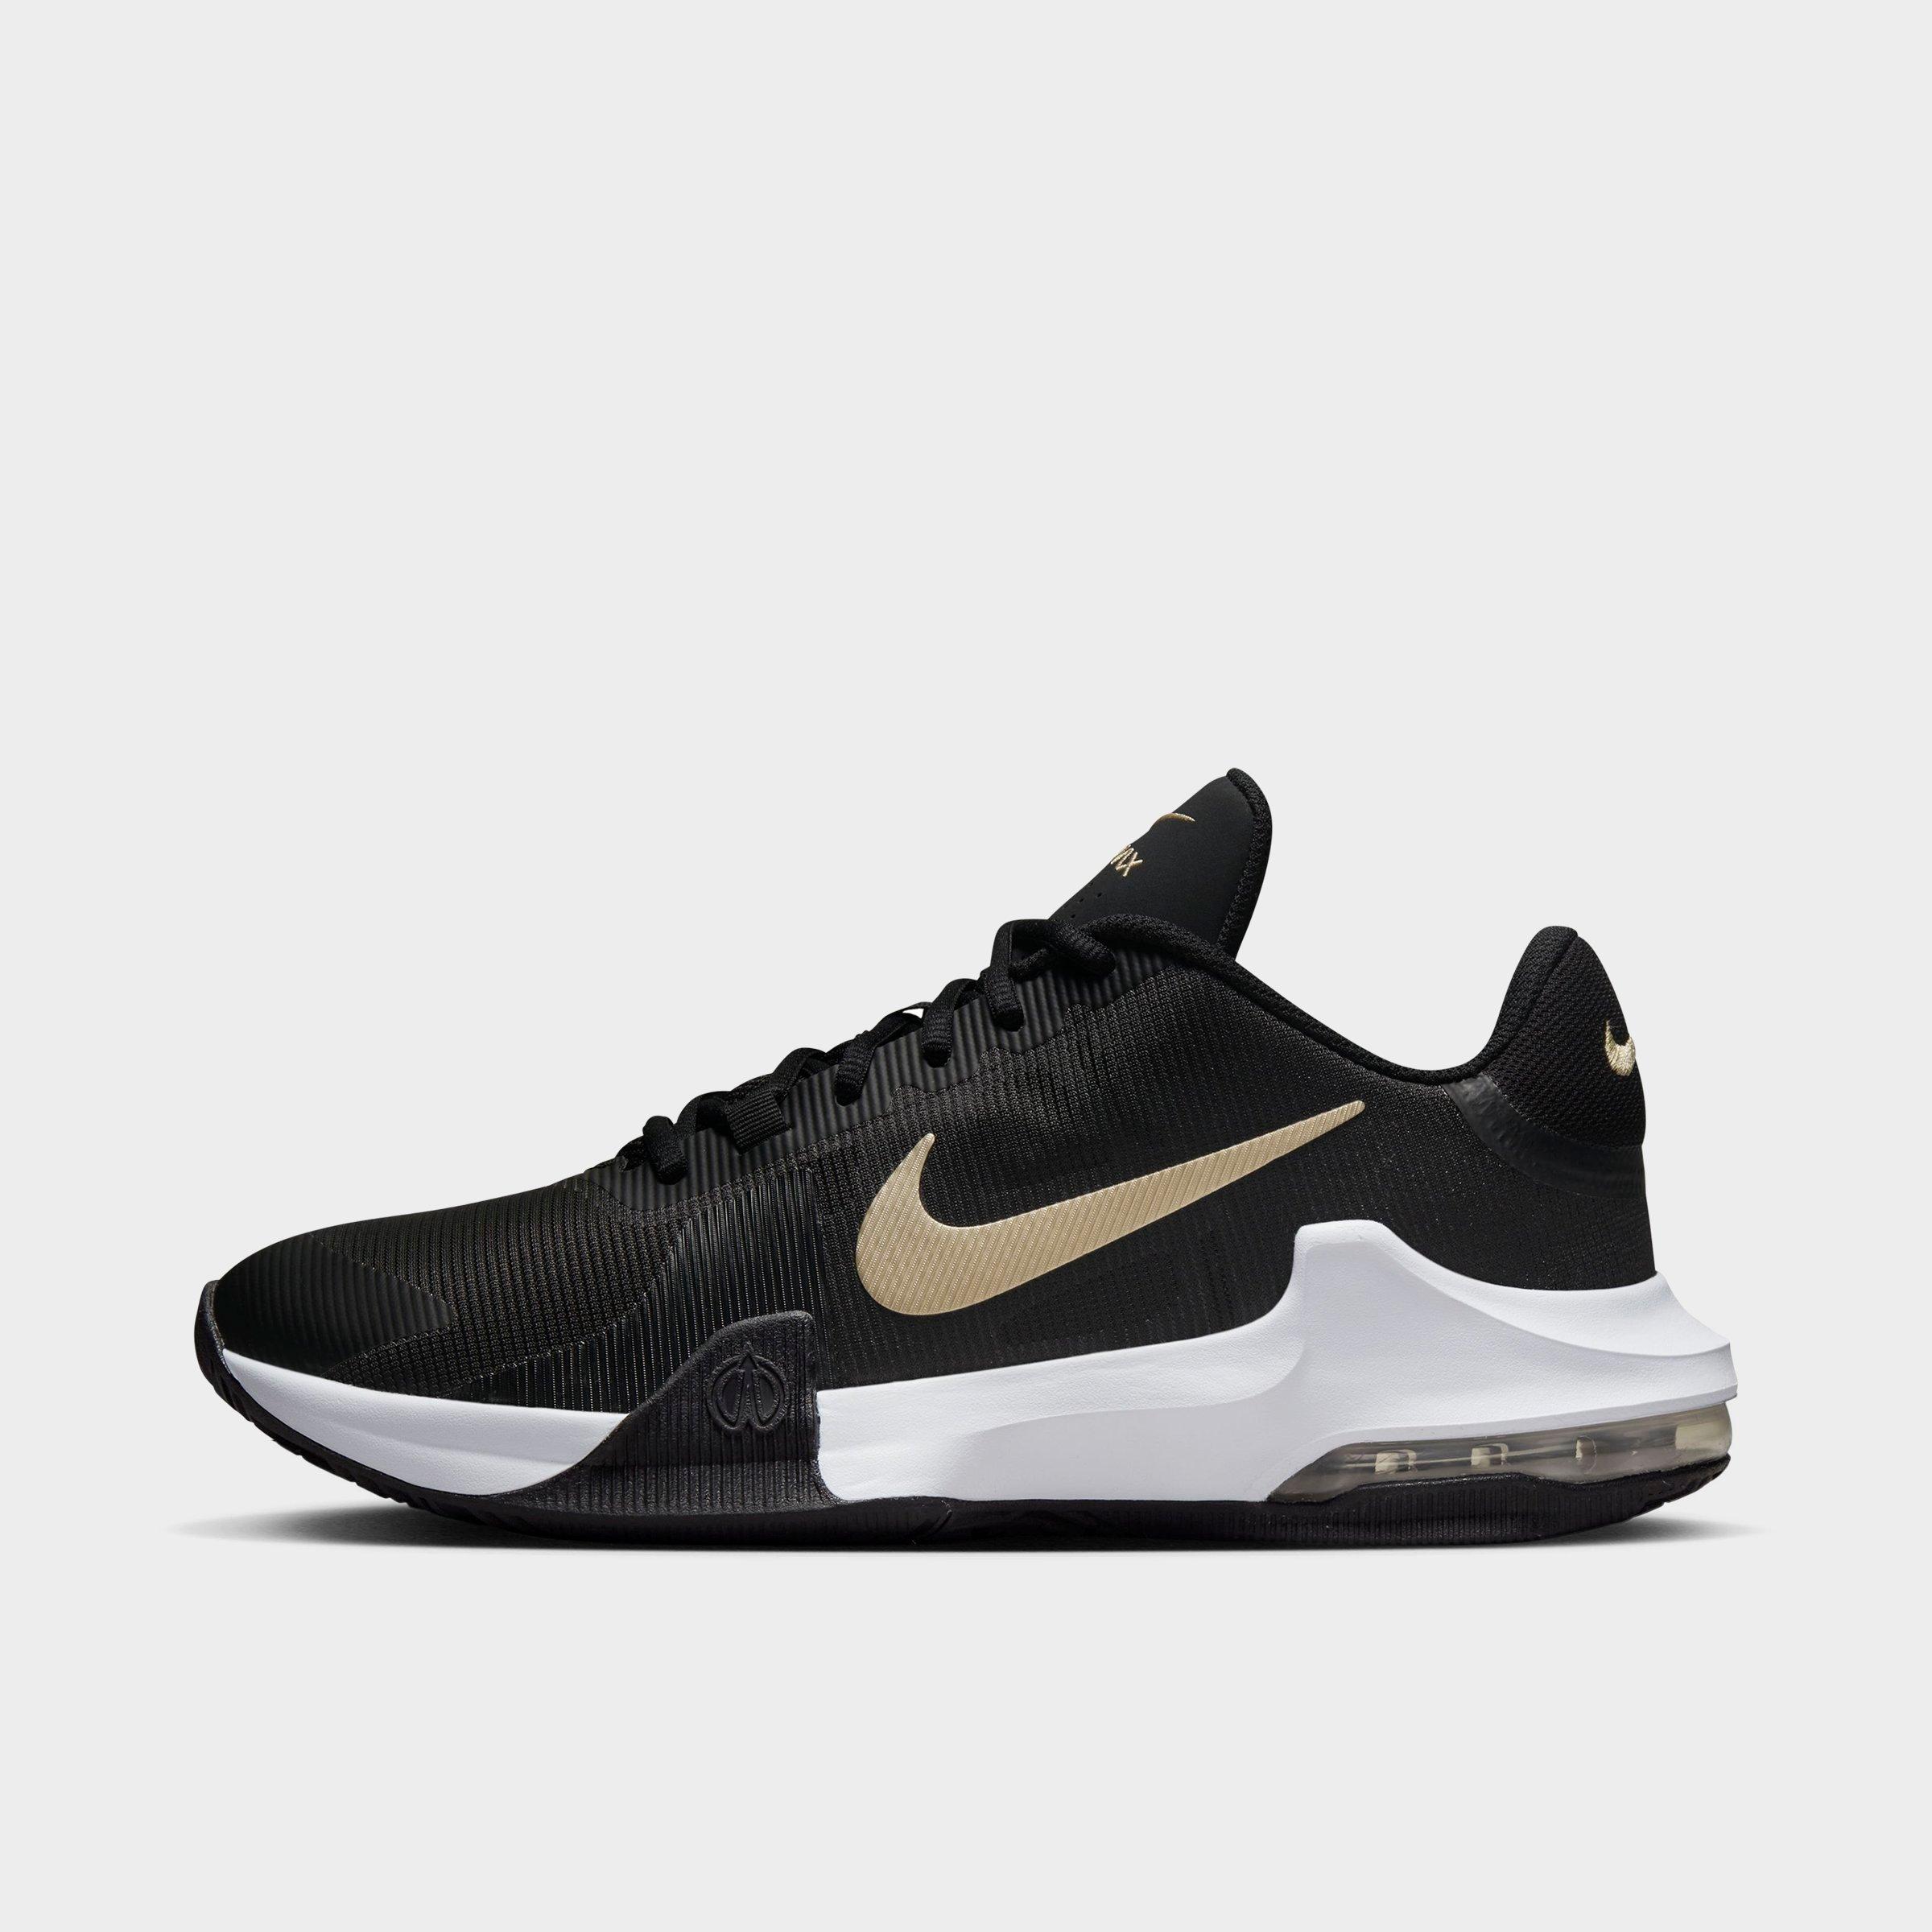 Nike Air Max Impact 4 Basketball Shoes In Black/anthracite/white/metallic Gold Star